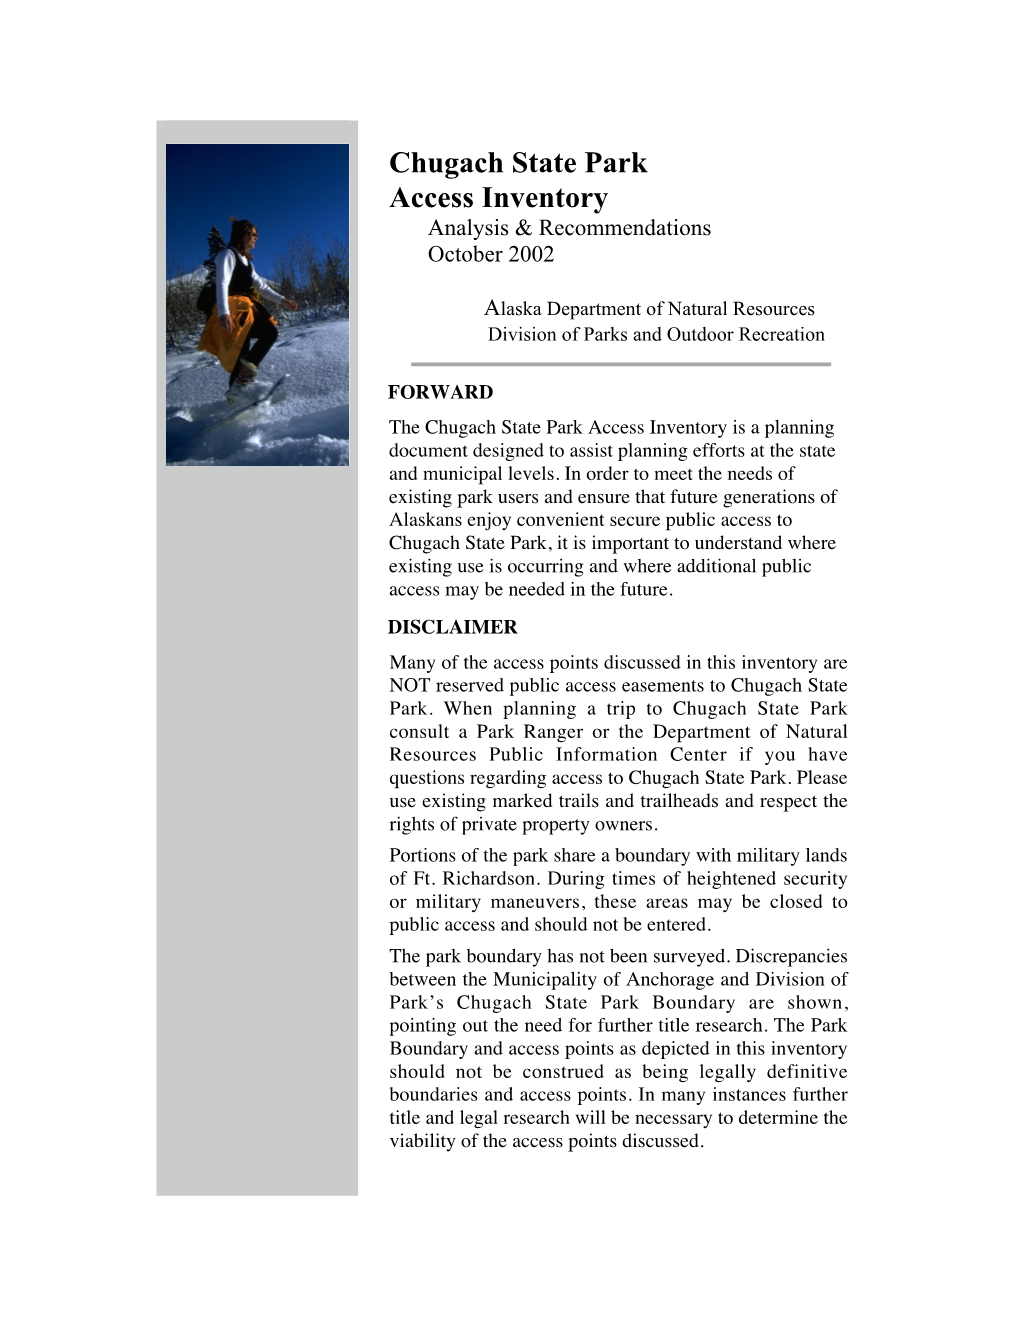 Chugach State Park Access Inventory Analysis & Recommendations October 2002